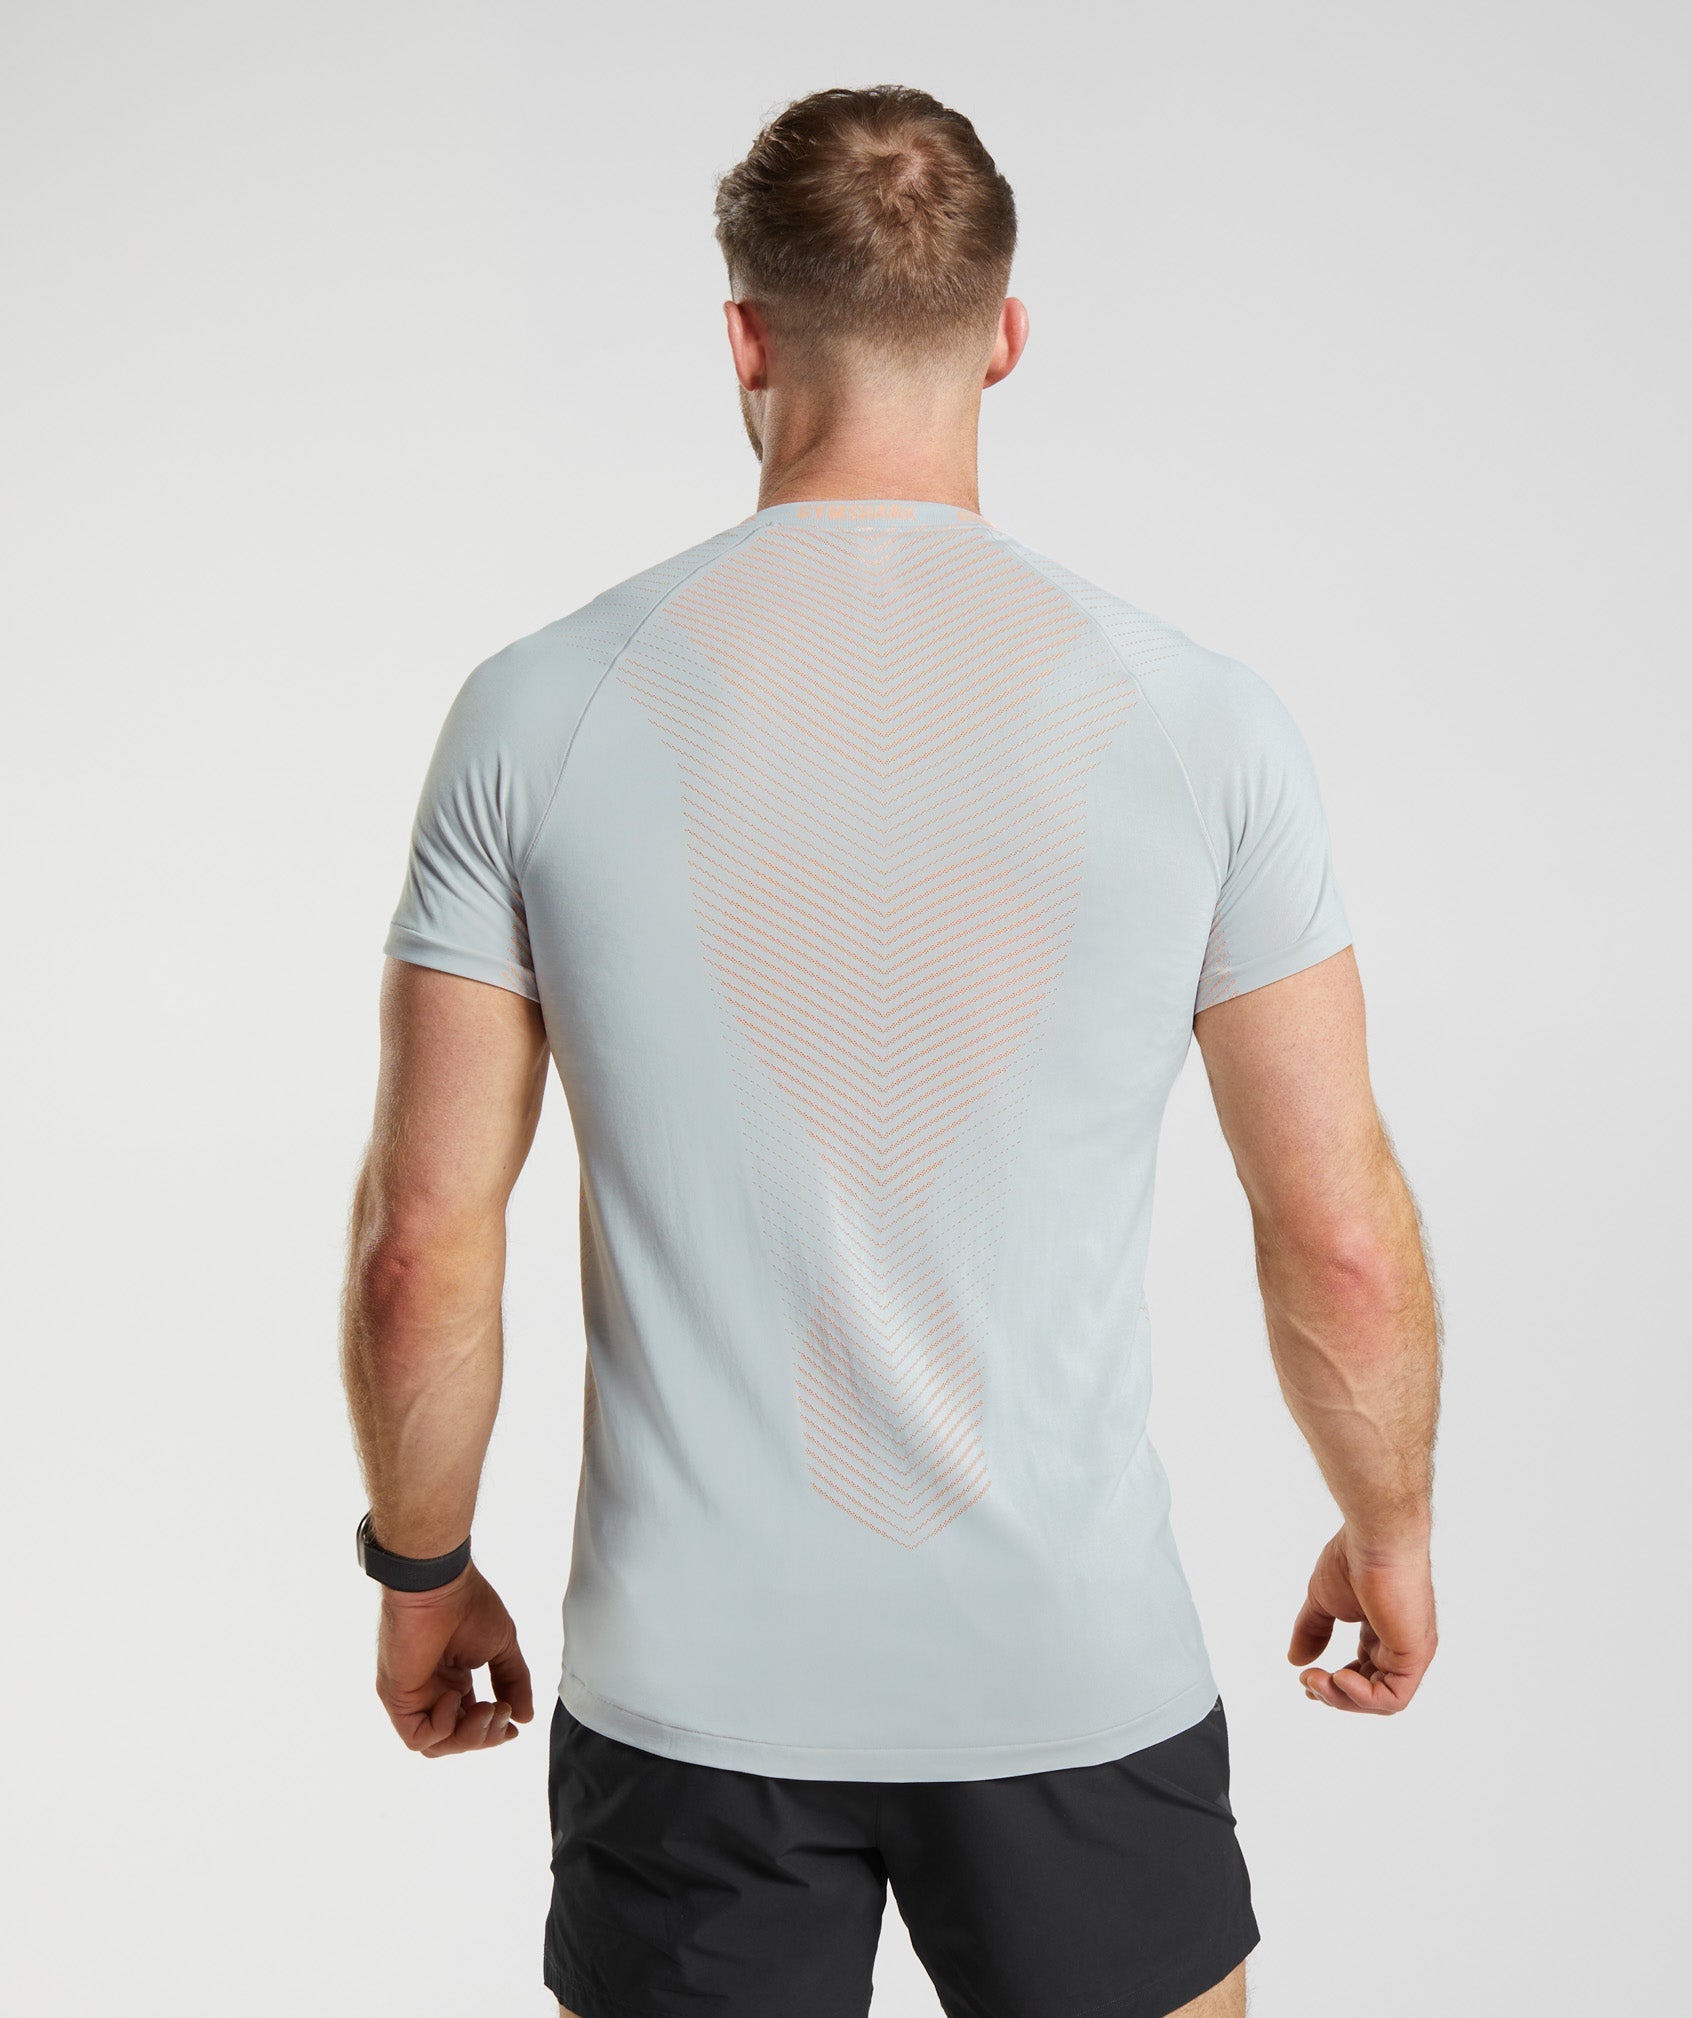 Apex Seamless T-Shirt in Light Grey/Fluo Peach - view 2